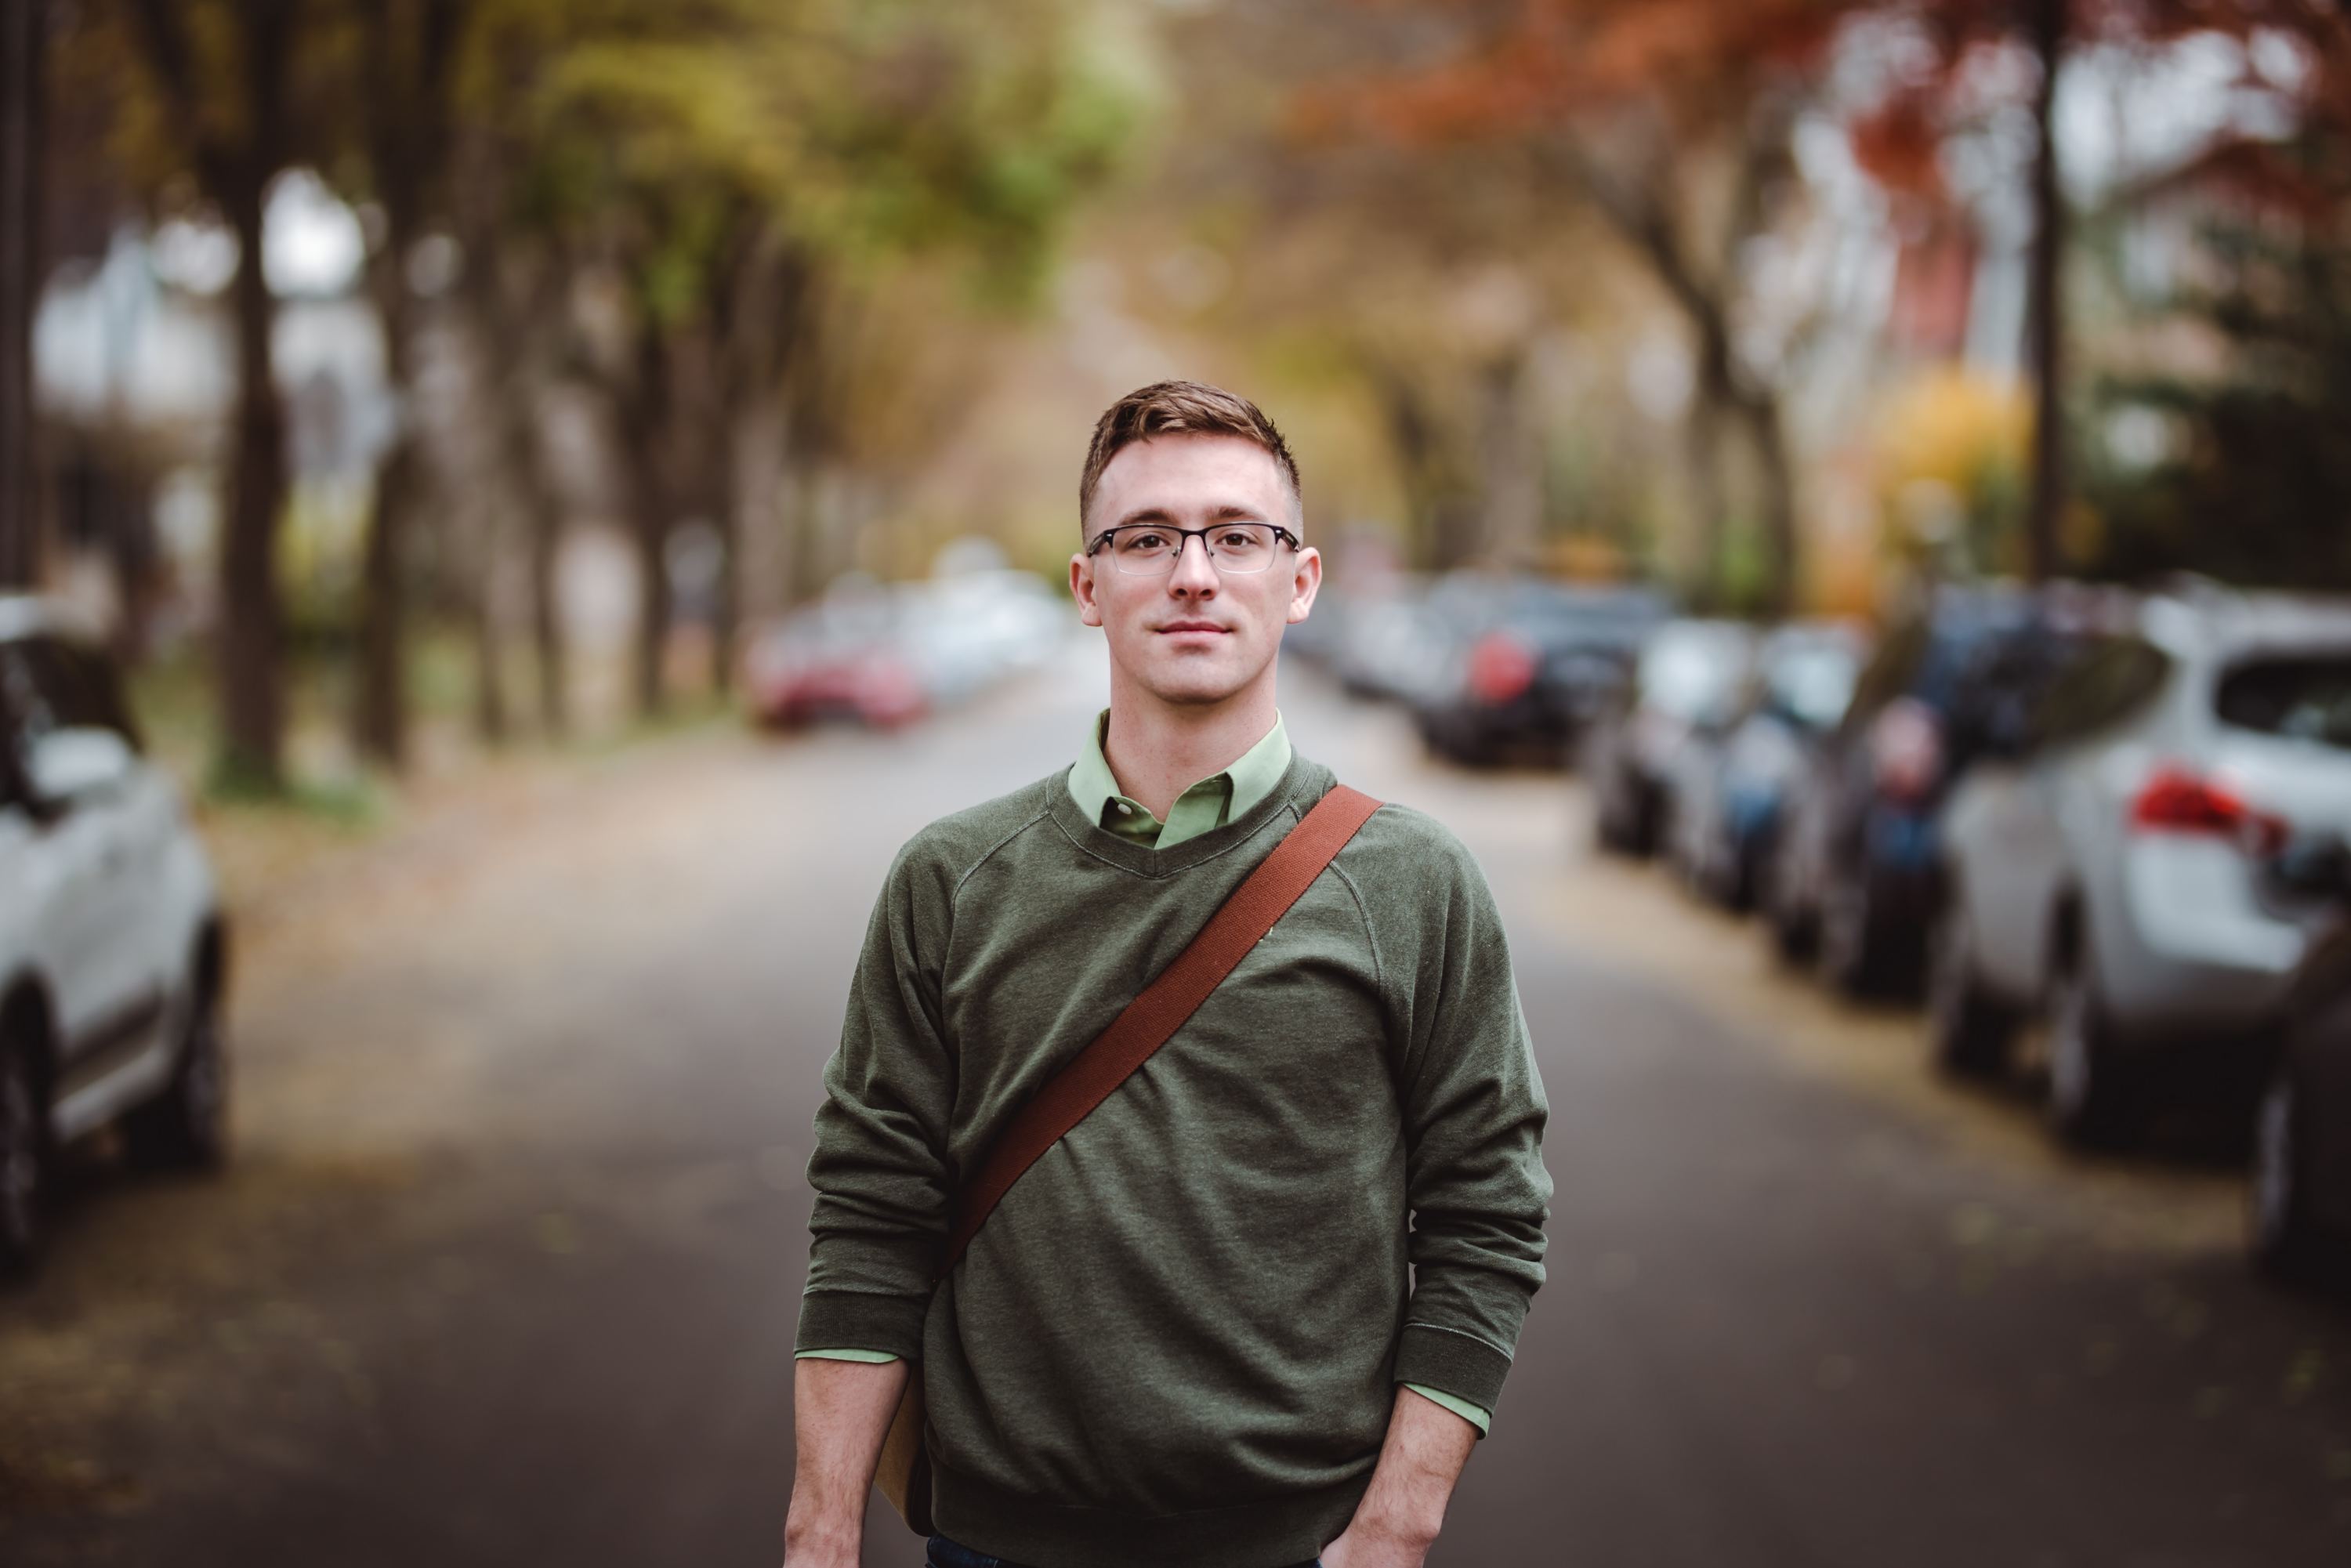 Young man in street gregory-hayes-2guarBycJJQ-unsplash